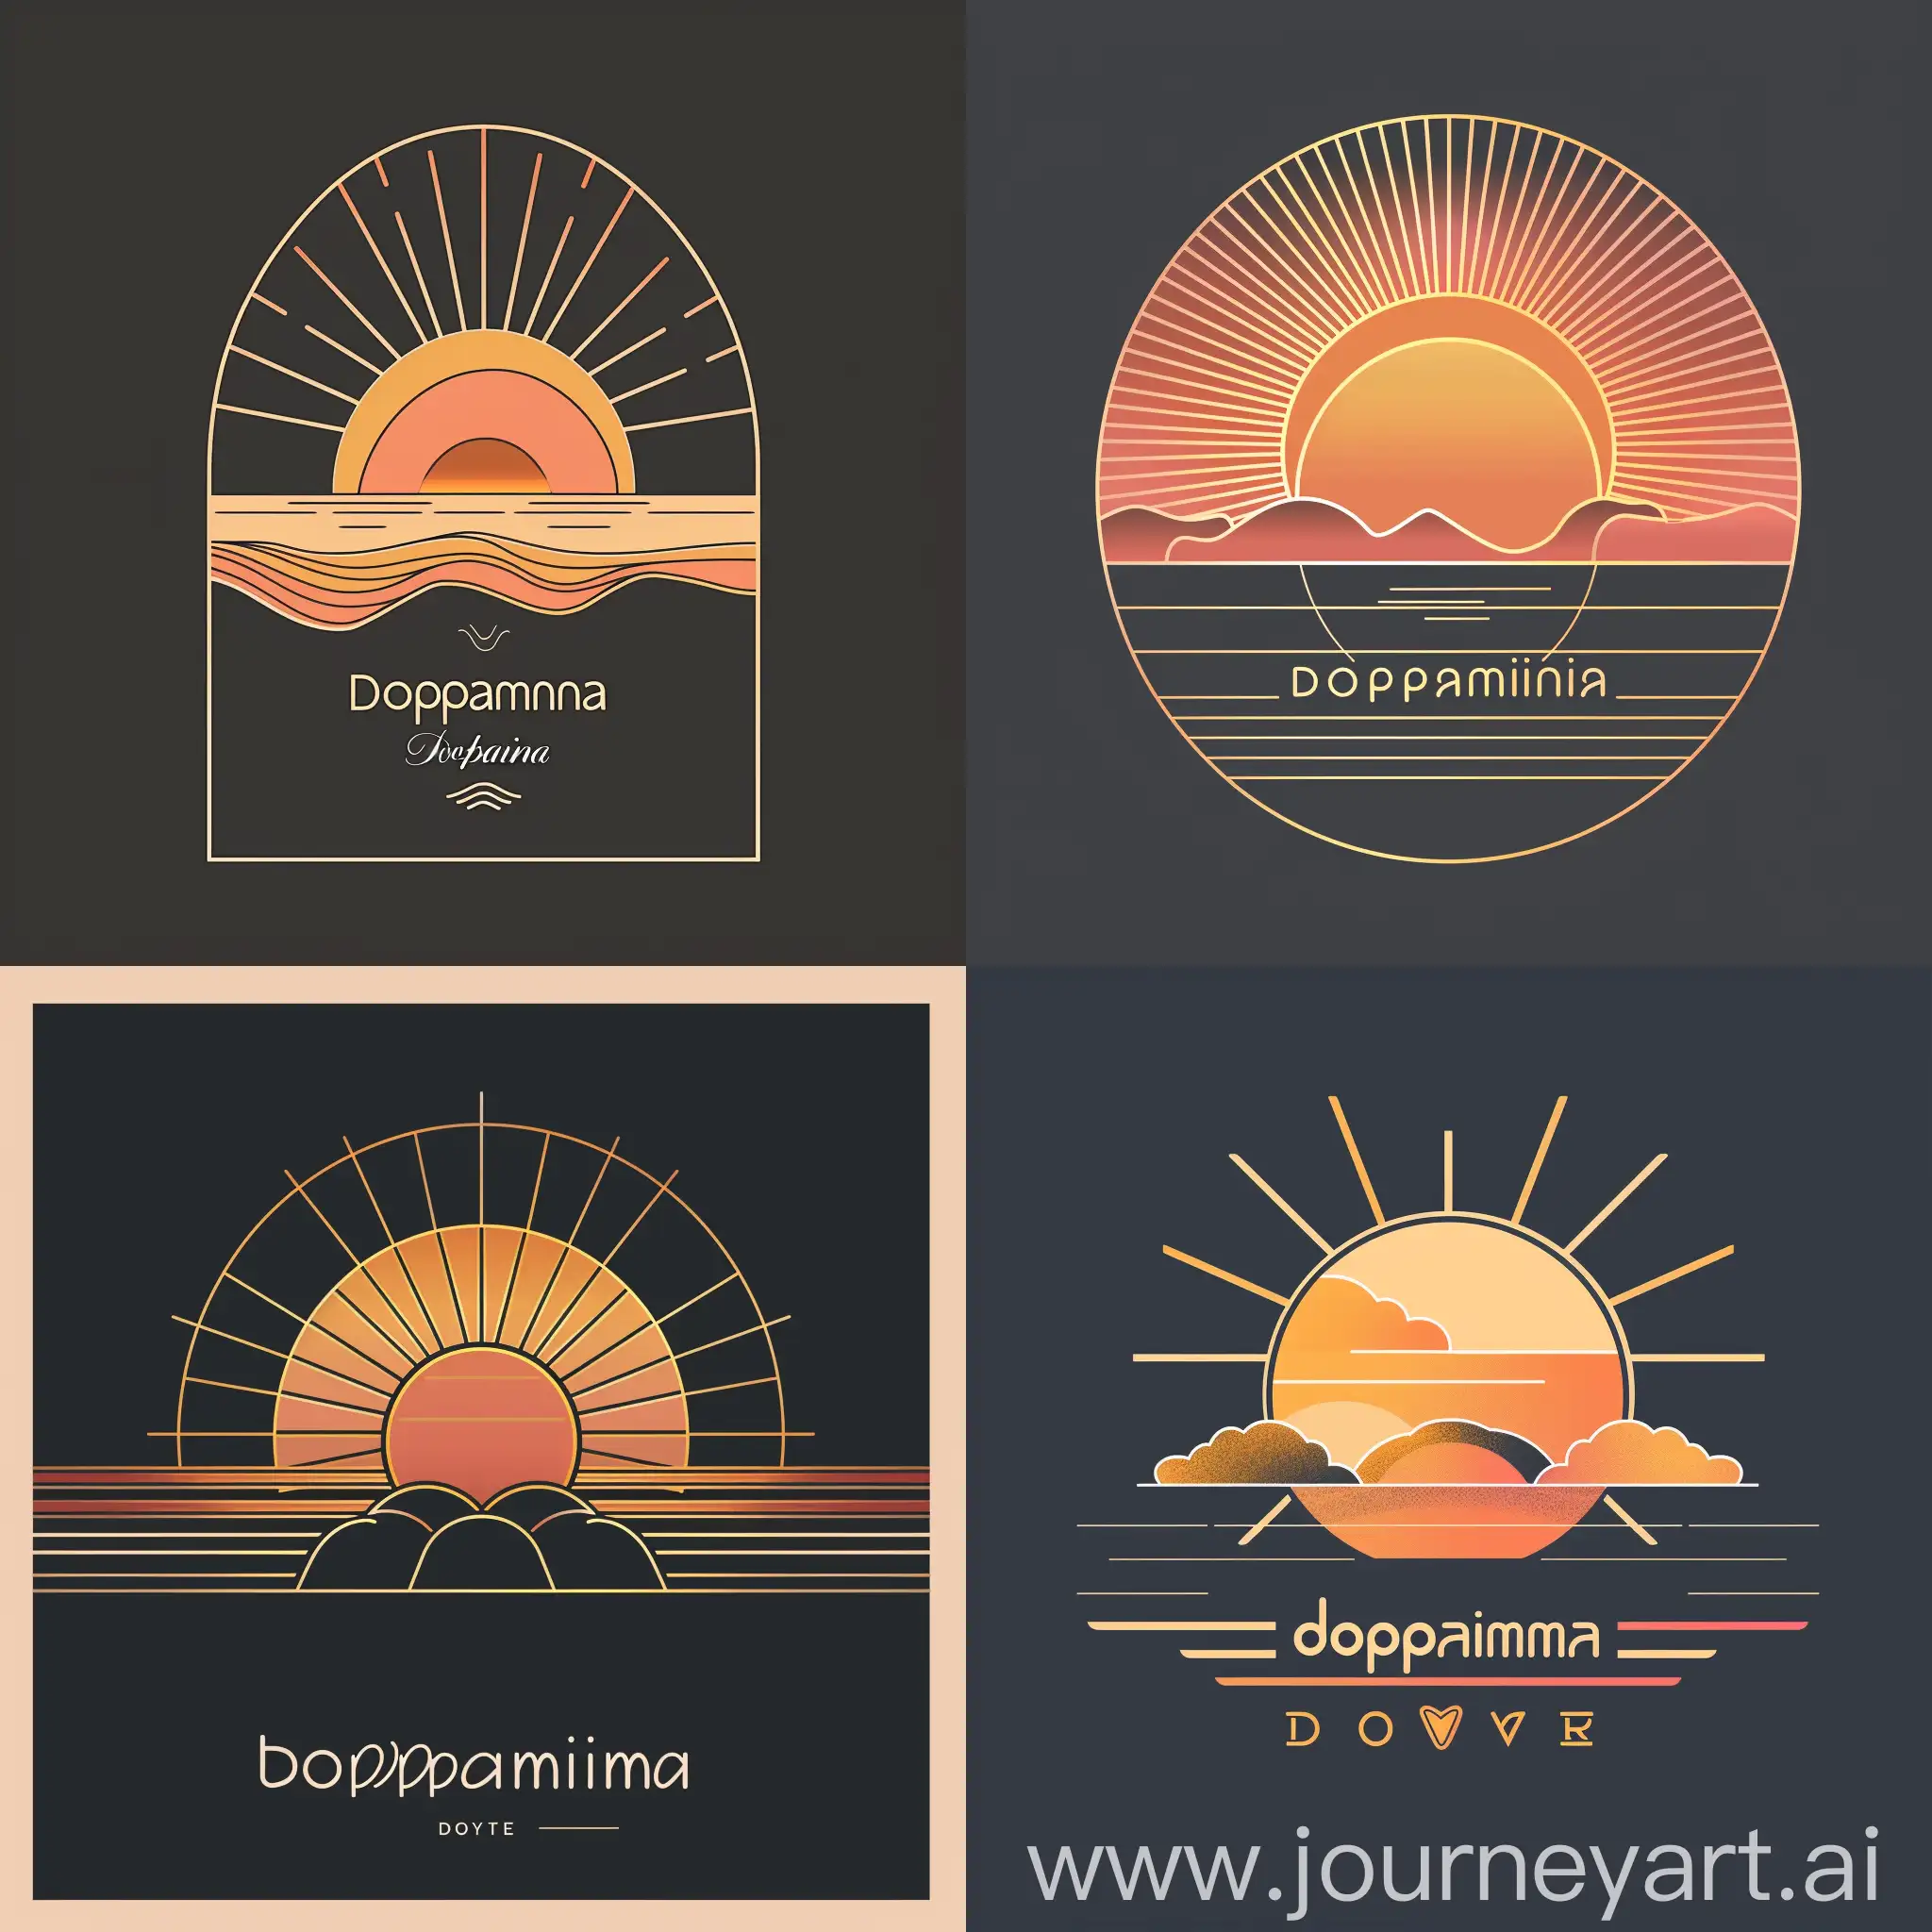 The logo would be composed of a stylized representation of the sun setting over the horizon, creating an atmosphere of sunset by the sea. The sun would be designed in an elegant and modern way, with smooth and refined lines to convey the feeling of luxury and sophistication. The colors used would be warm tones of orange, gold and pink to represent the sky in late afternoon tones.  The name "Dopamine" would be written in an elegant, stylized font, positioned below the sun, in a color that stands out against the background, such as white or gold. The word "Dopamine" would be accompanied by a small icon or decorative detail that resembles a gentle wave, to emphasize the connection with the sea and music.  The end result would be a sophisticated logo, which conveys the unique atmosphere of a sunset by the sea and reflects the style and personality of the DJ and his project "Dopamina"